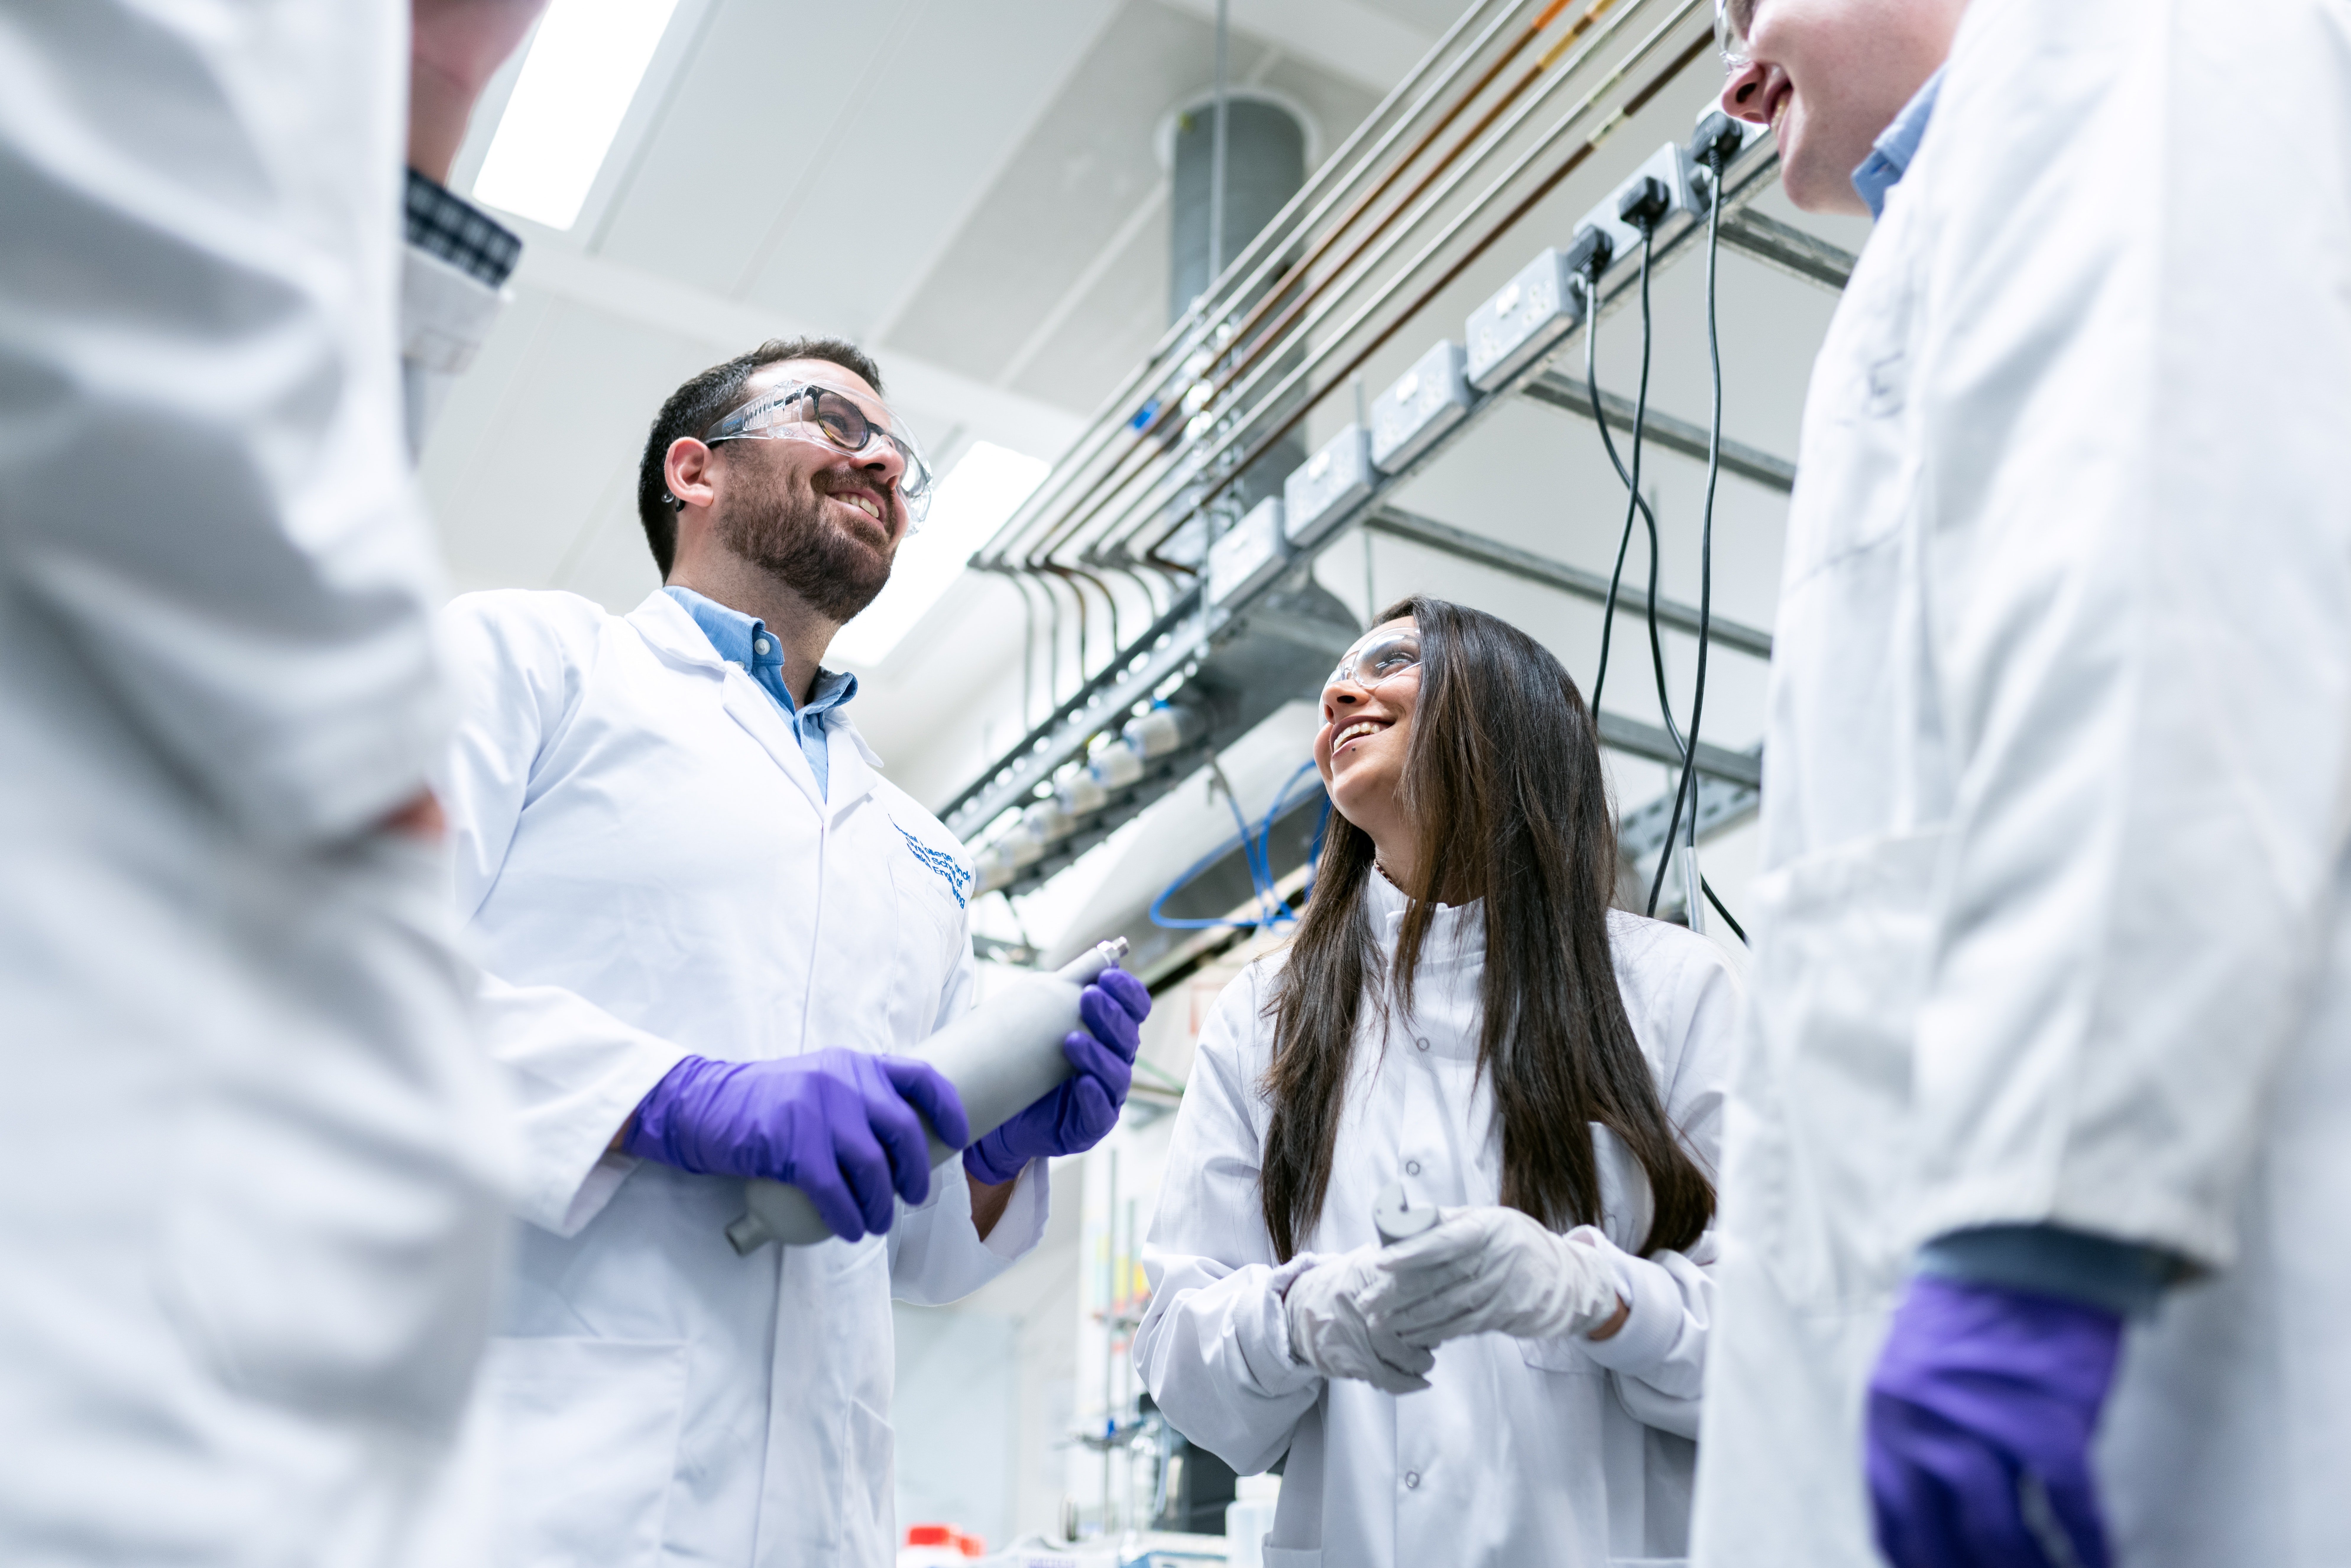 Pictured - Chemical engineers in the laboratory | Source: Pexels 